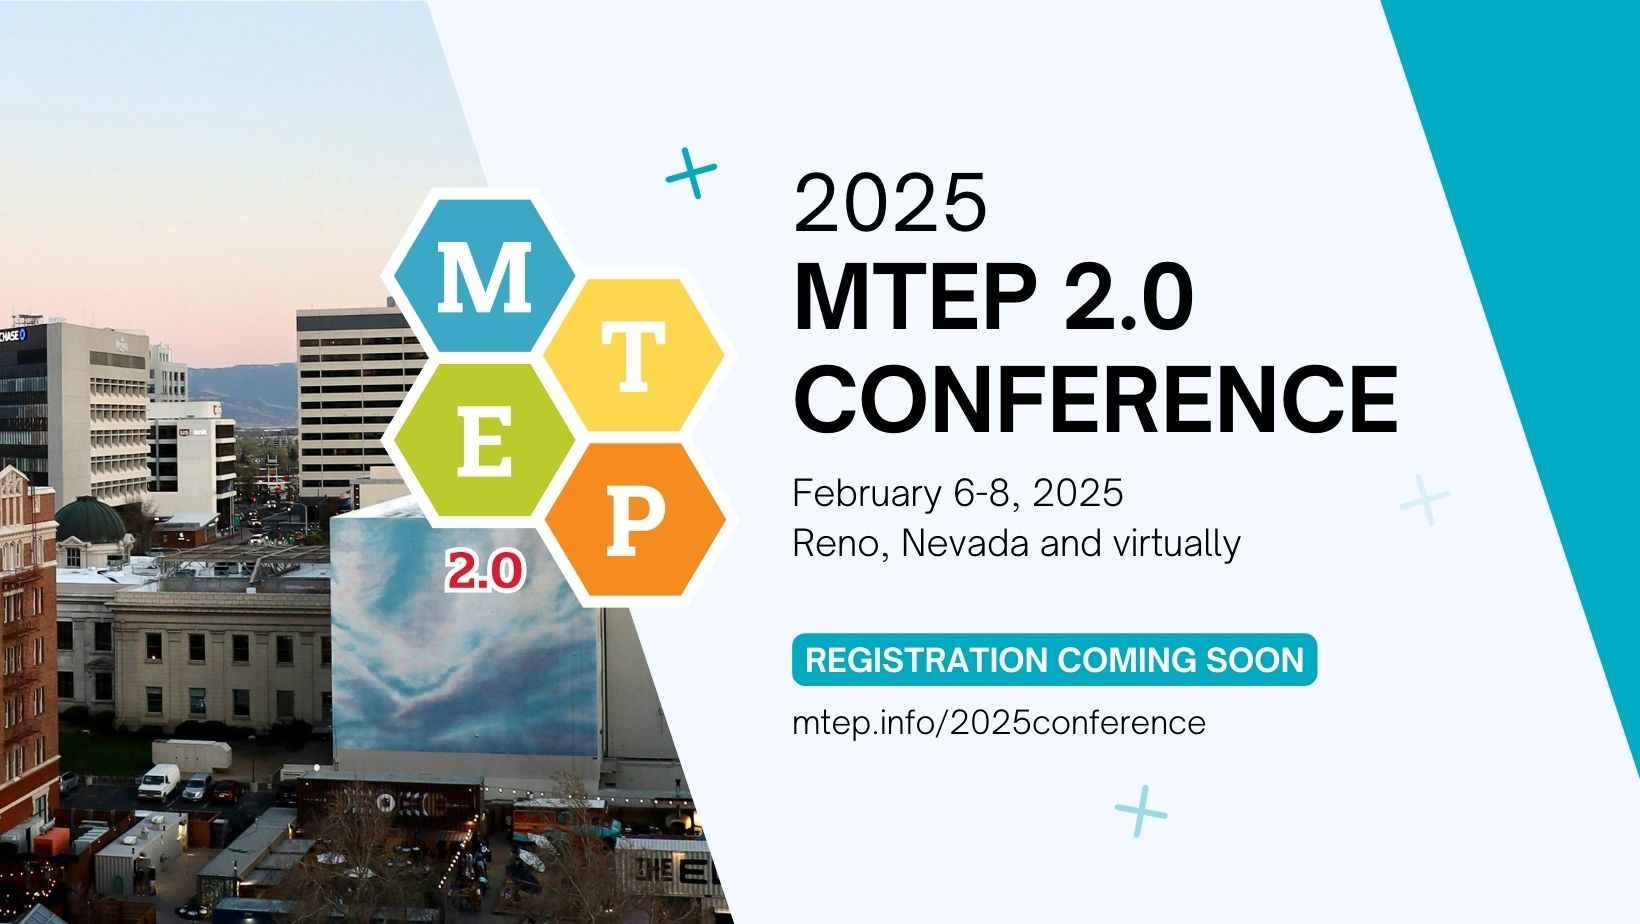 https://mtep.info/2025conference